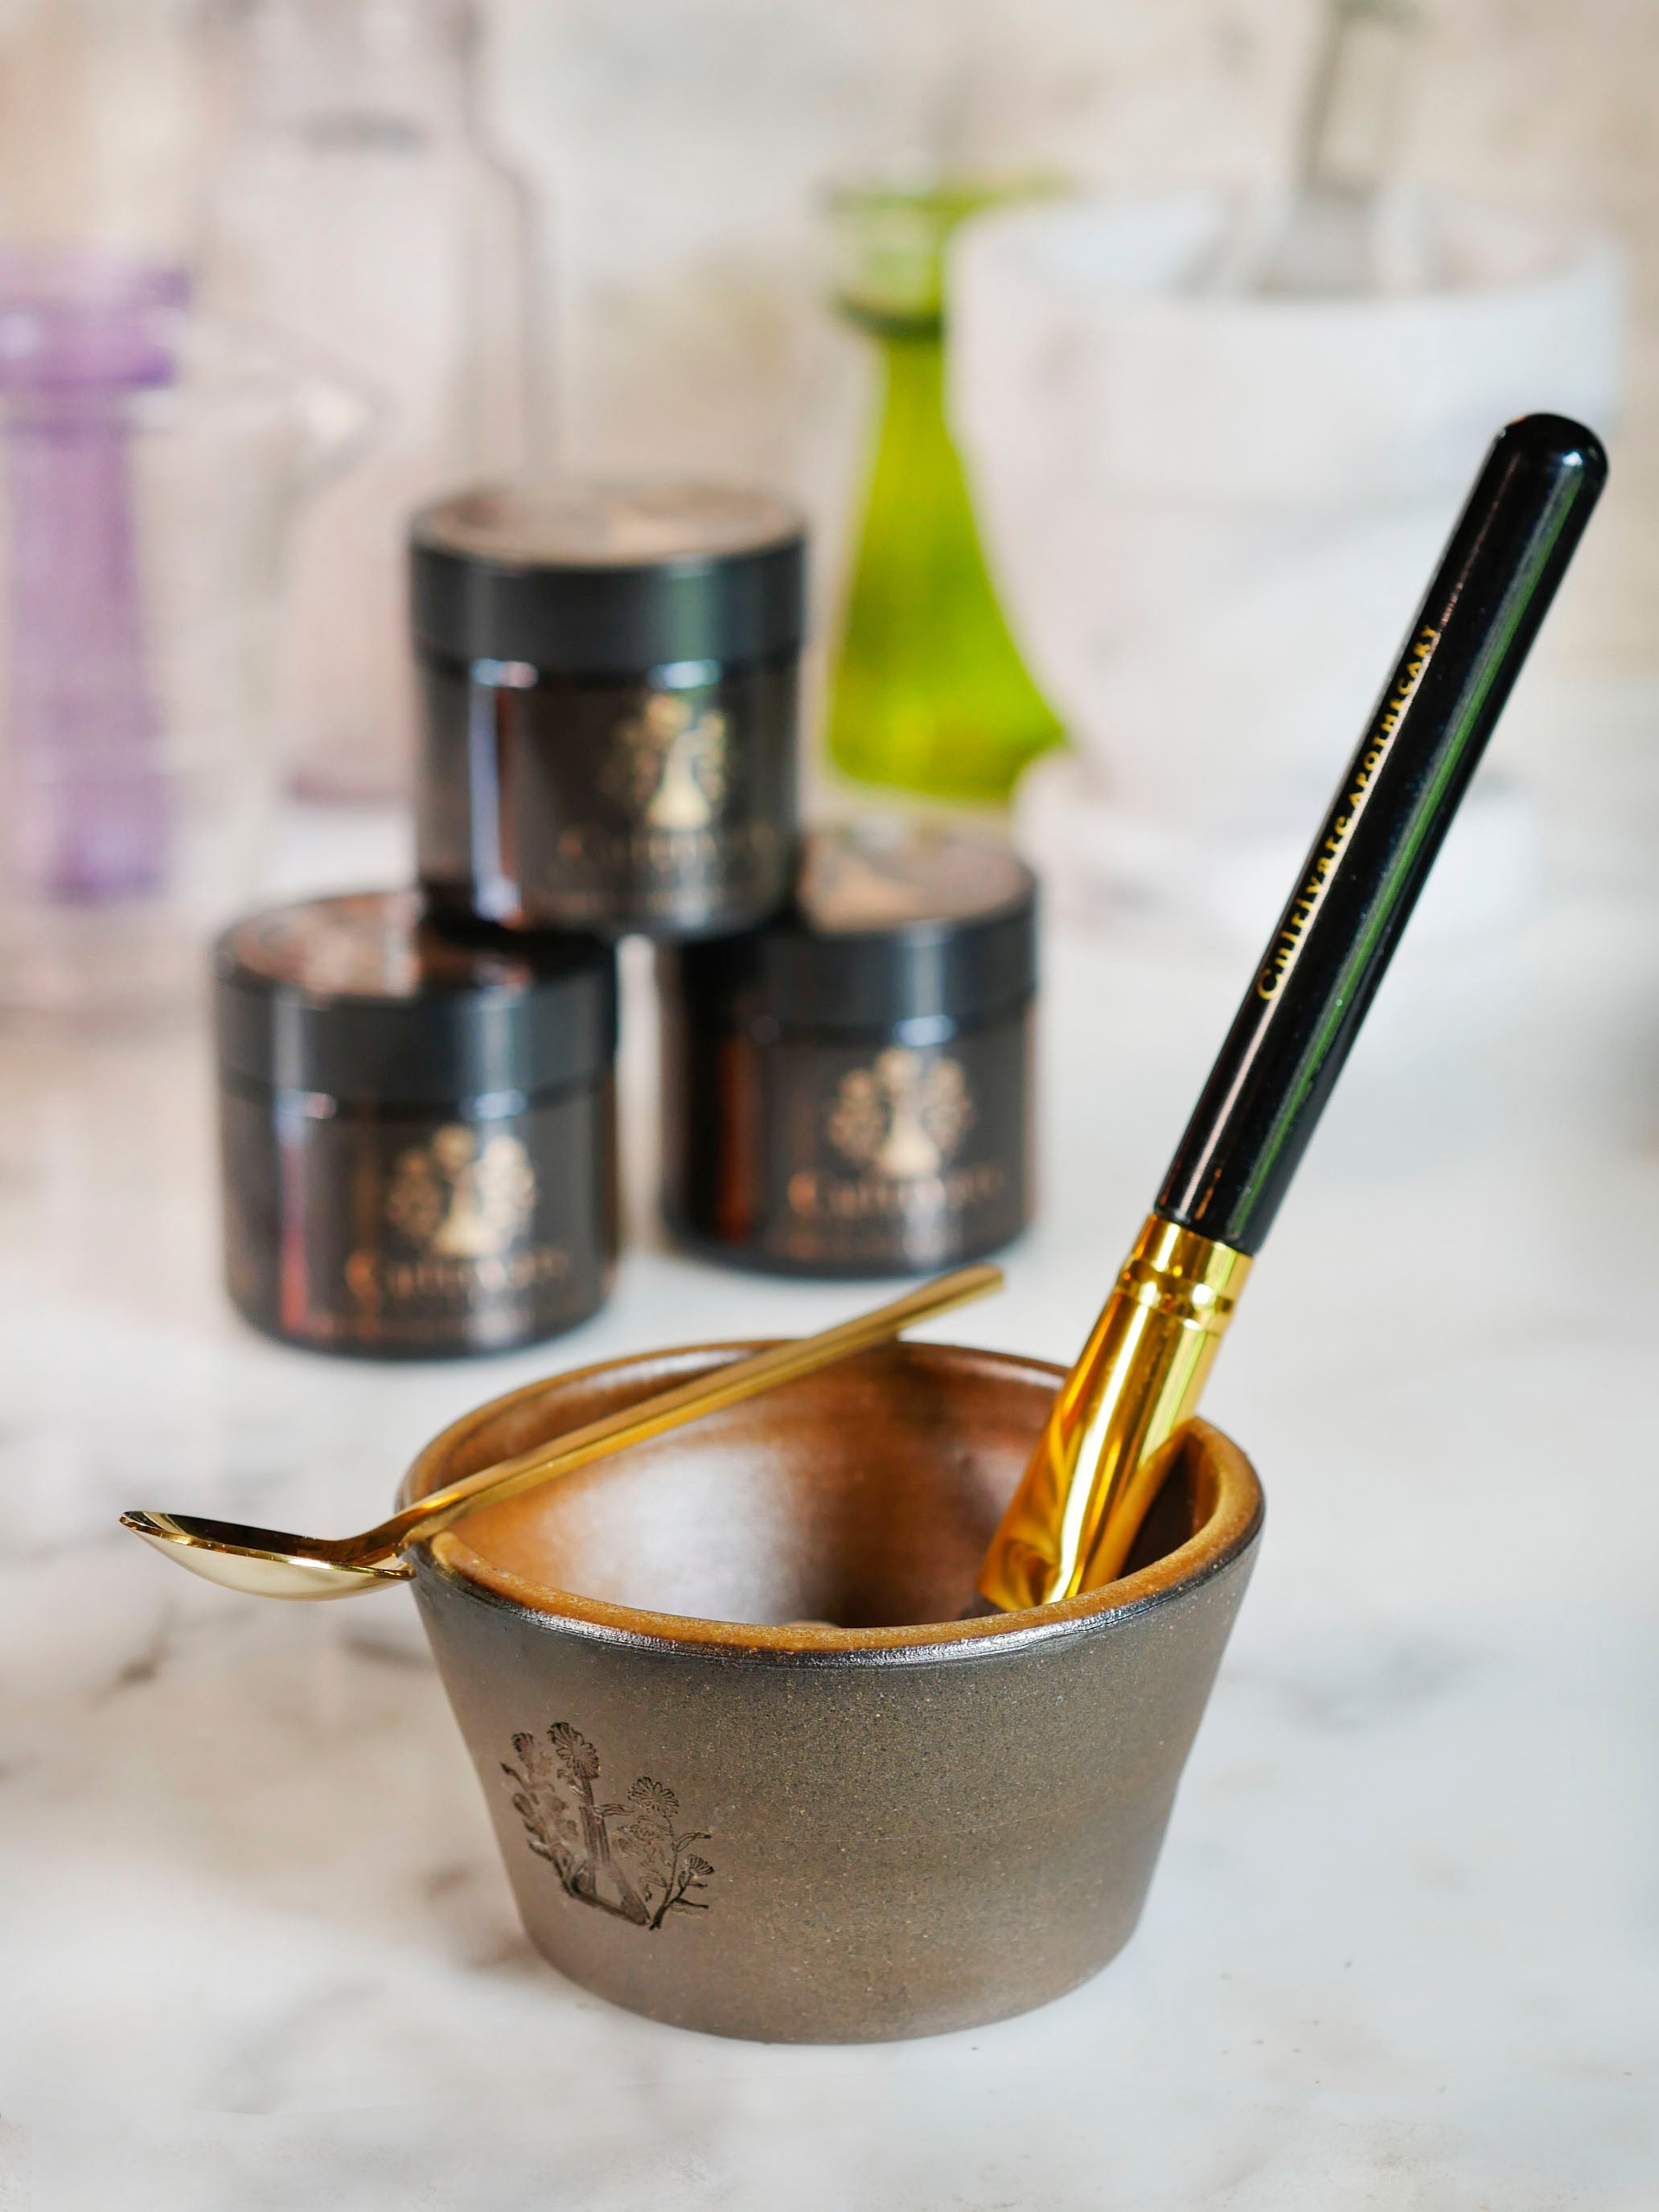 A face mask brush resting inside of a mixing bowl for clay face masks.